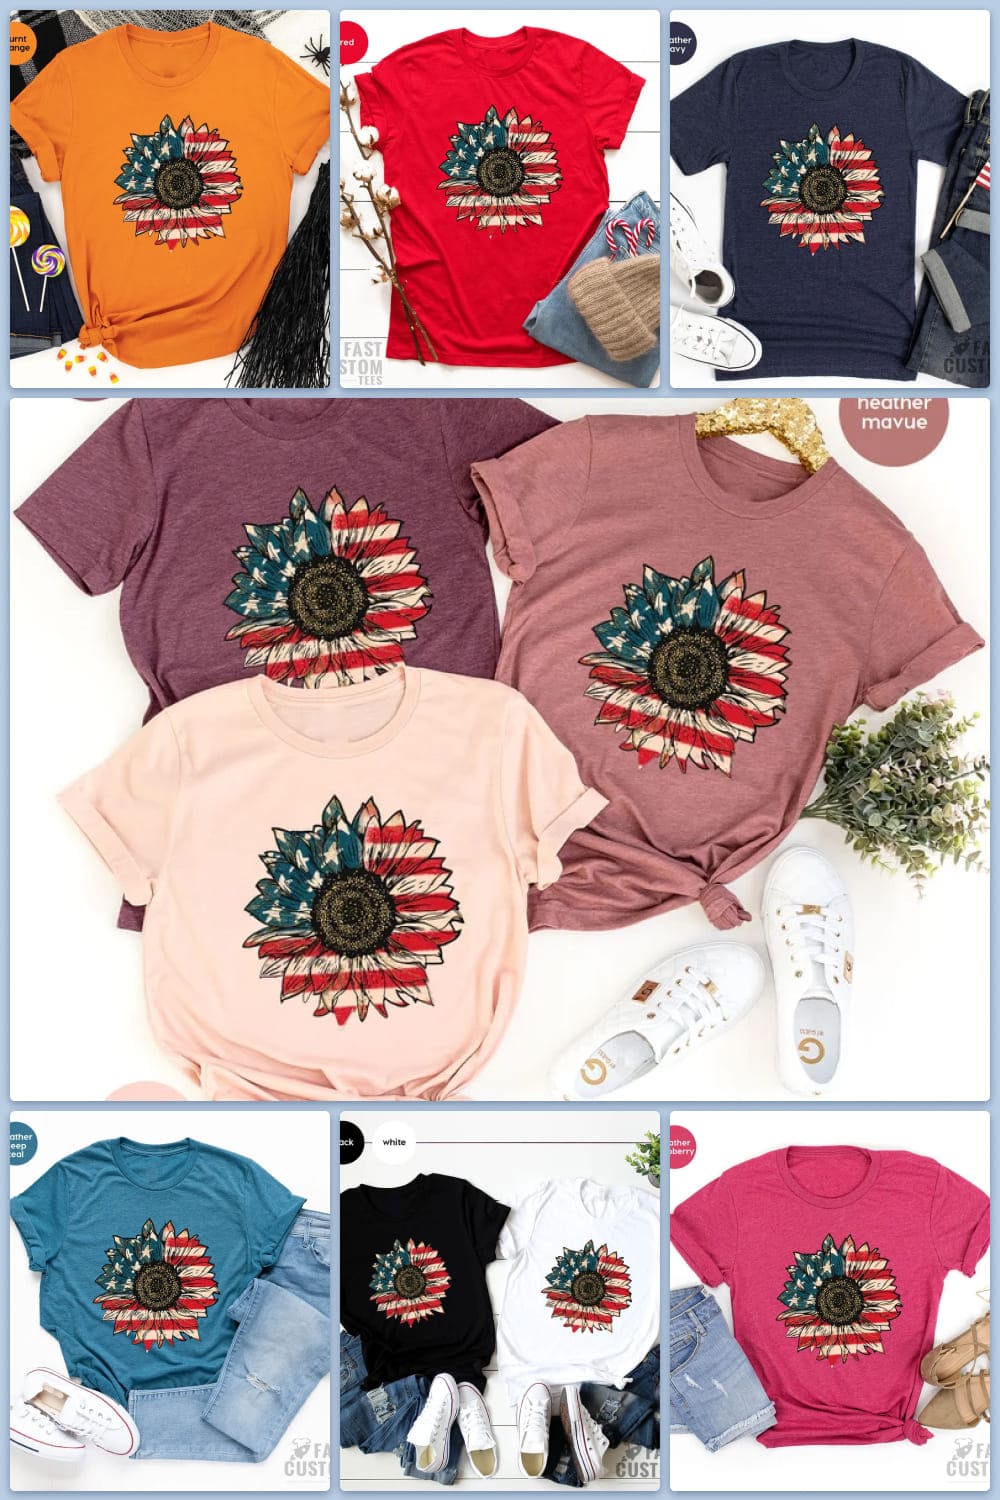 T-shirts with a sunflower painted in the style of the American flag.